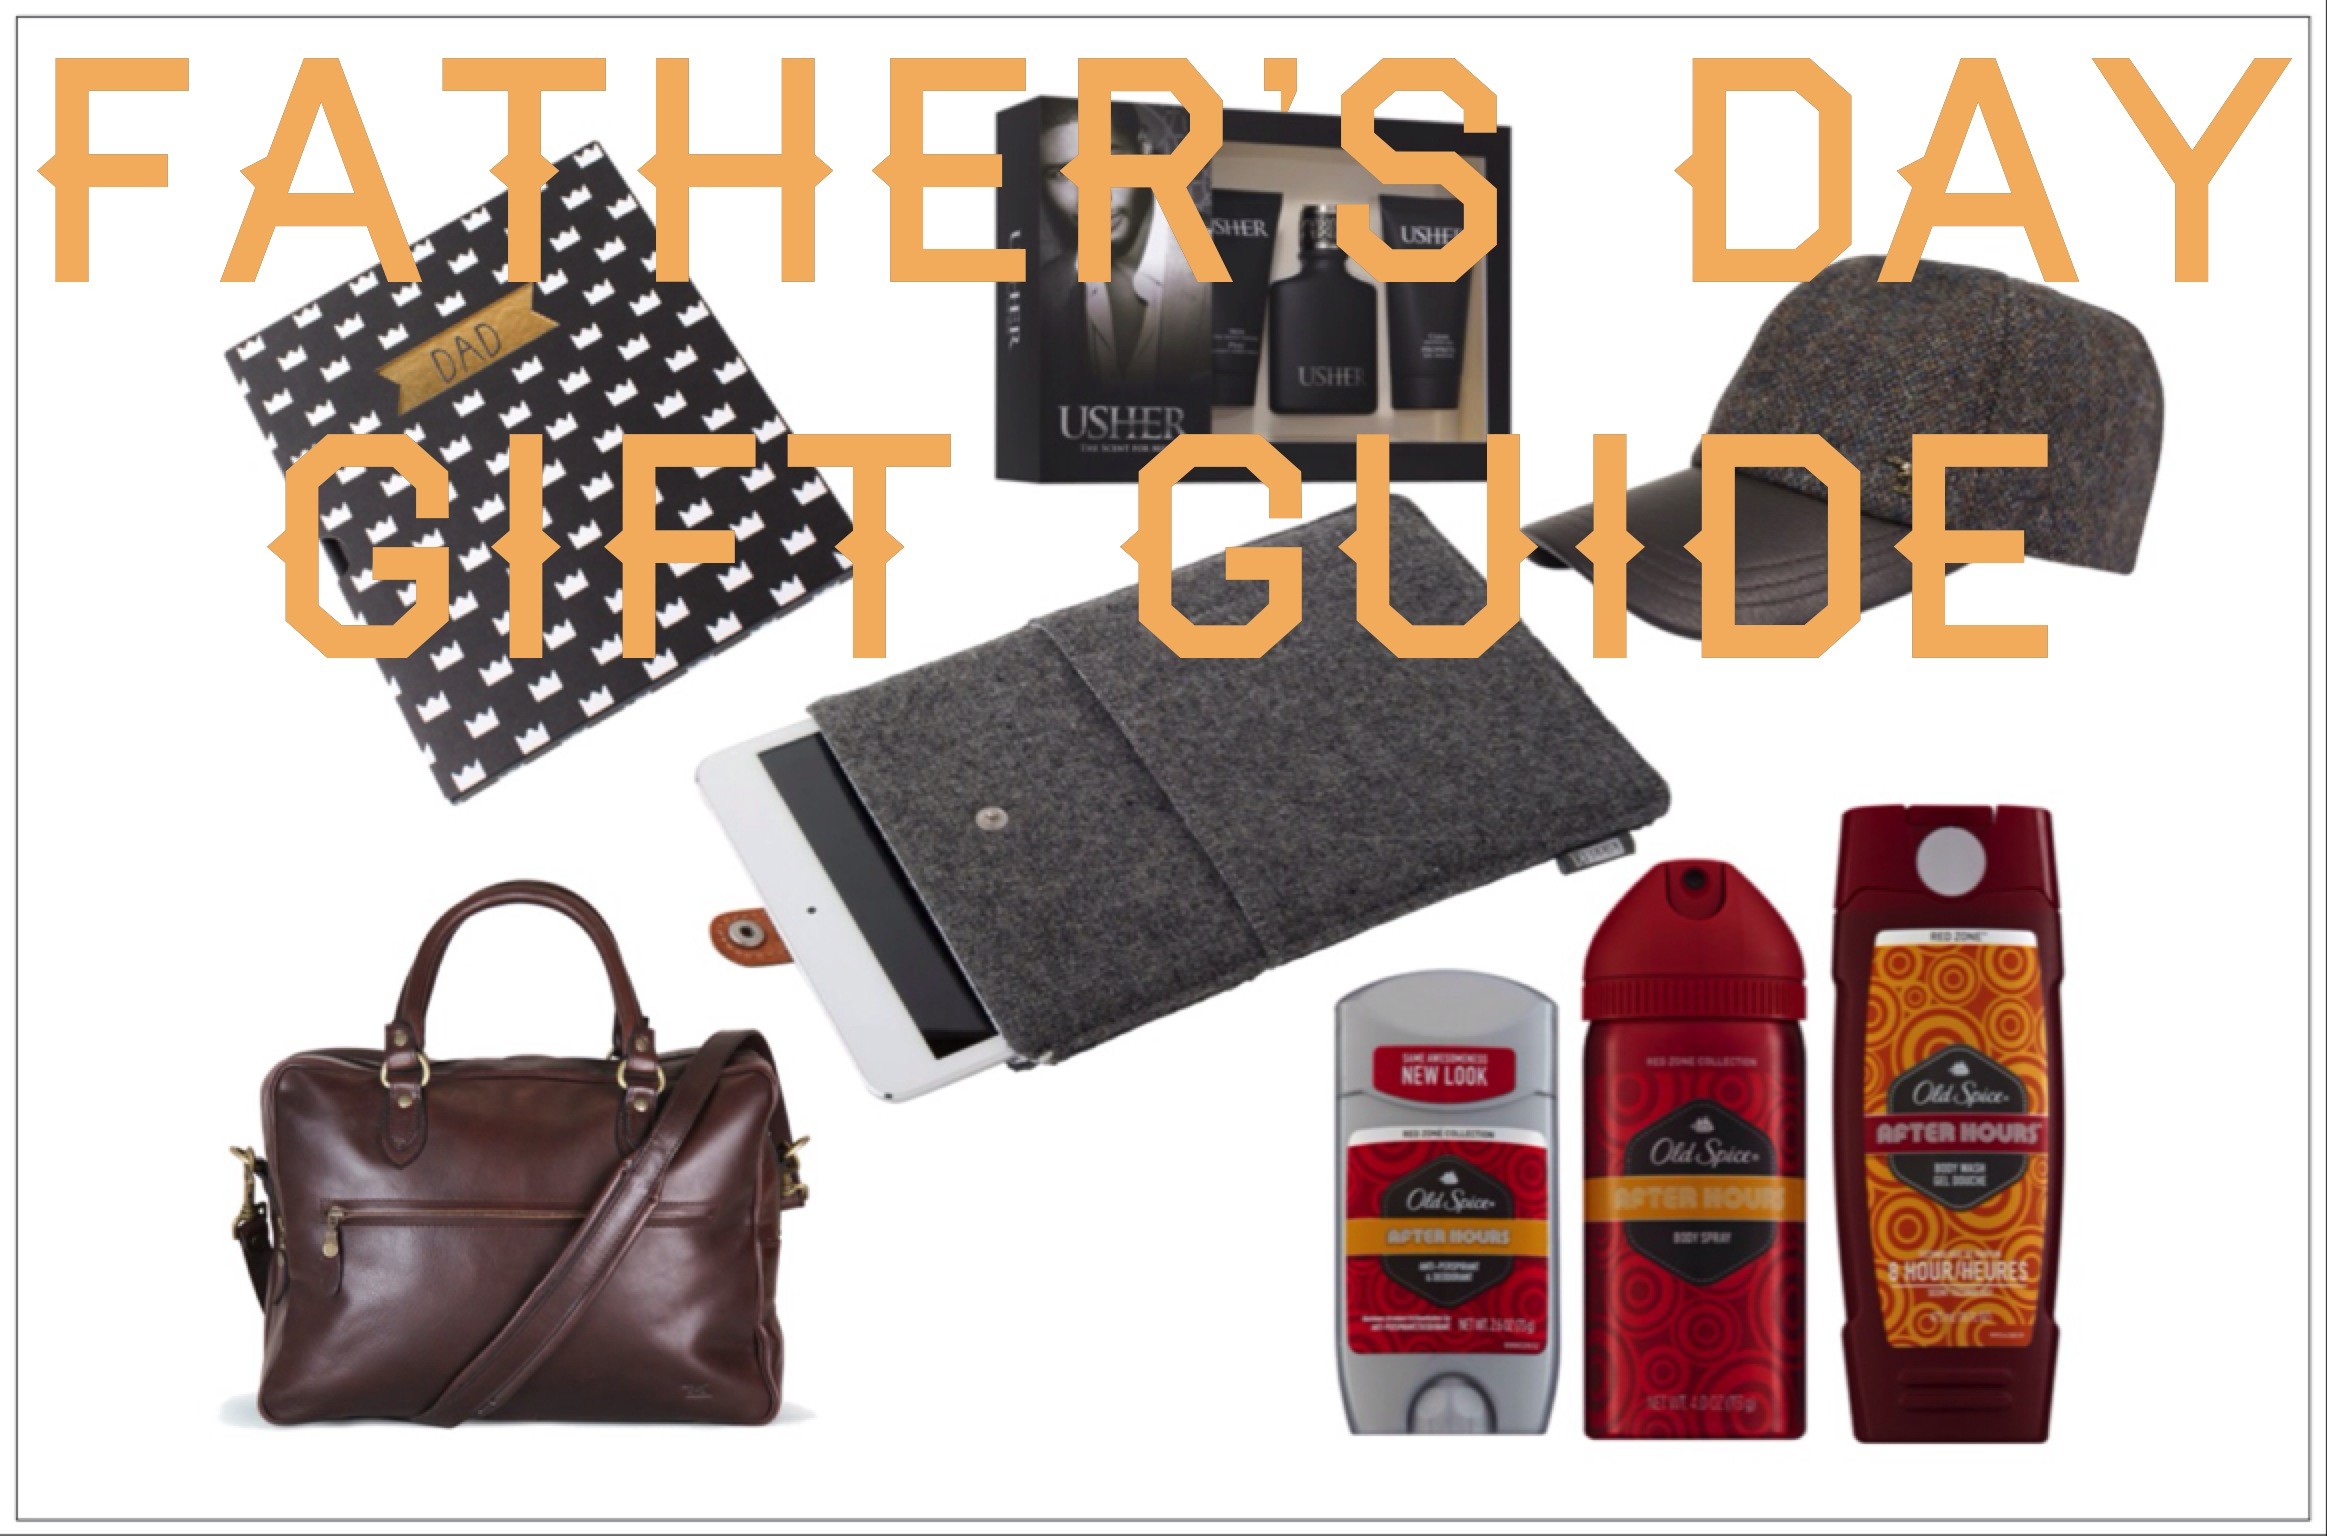 Father’s Day, Fathers Day Gift Guide, Dad, Father’s Day Gift Guide NZ 2013 , LUSH NZ, fathers day presents, Mildred and Co, Mildred&Co, what to buy dad, Old Spice, Old Spice After Hours, USHER, USHER Gift Set, kikki-k, Palmers Cocoa Butter, For Men, Rodd & Gun, Walker & Hall, Mad Men, Whiskey Glasses, Cufflinks, Aftershave, fashion media nz, beauty media nz, fashion blog nz, style blog nz, beauty blog nz, angie Fredatovich, gurlinterrupted.com